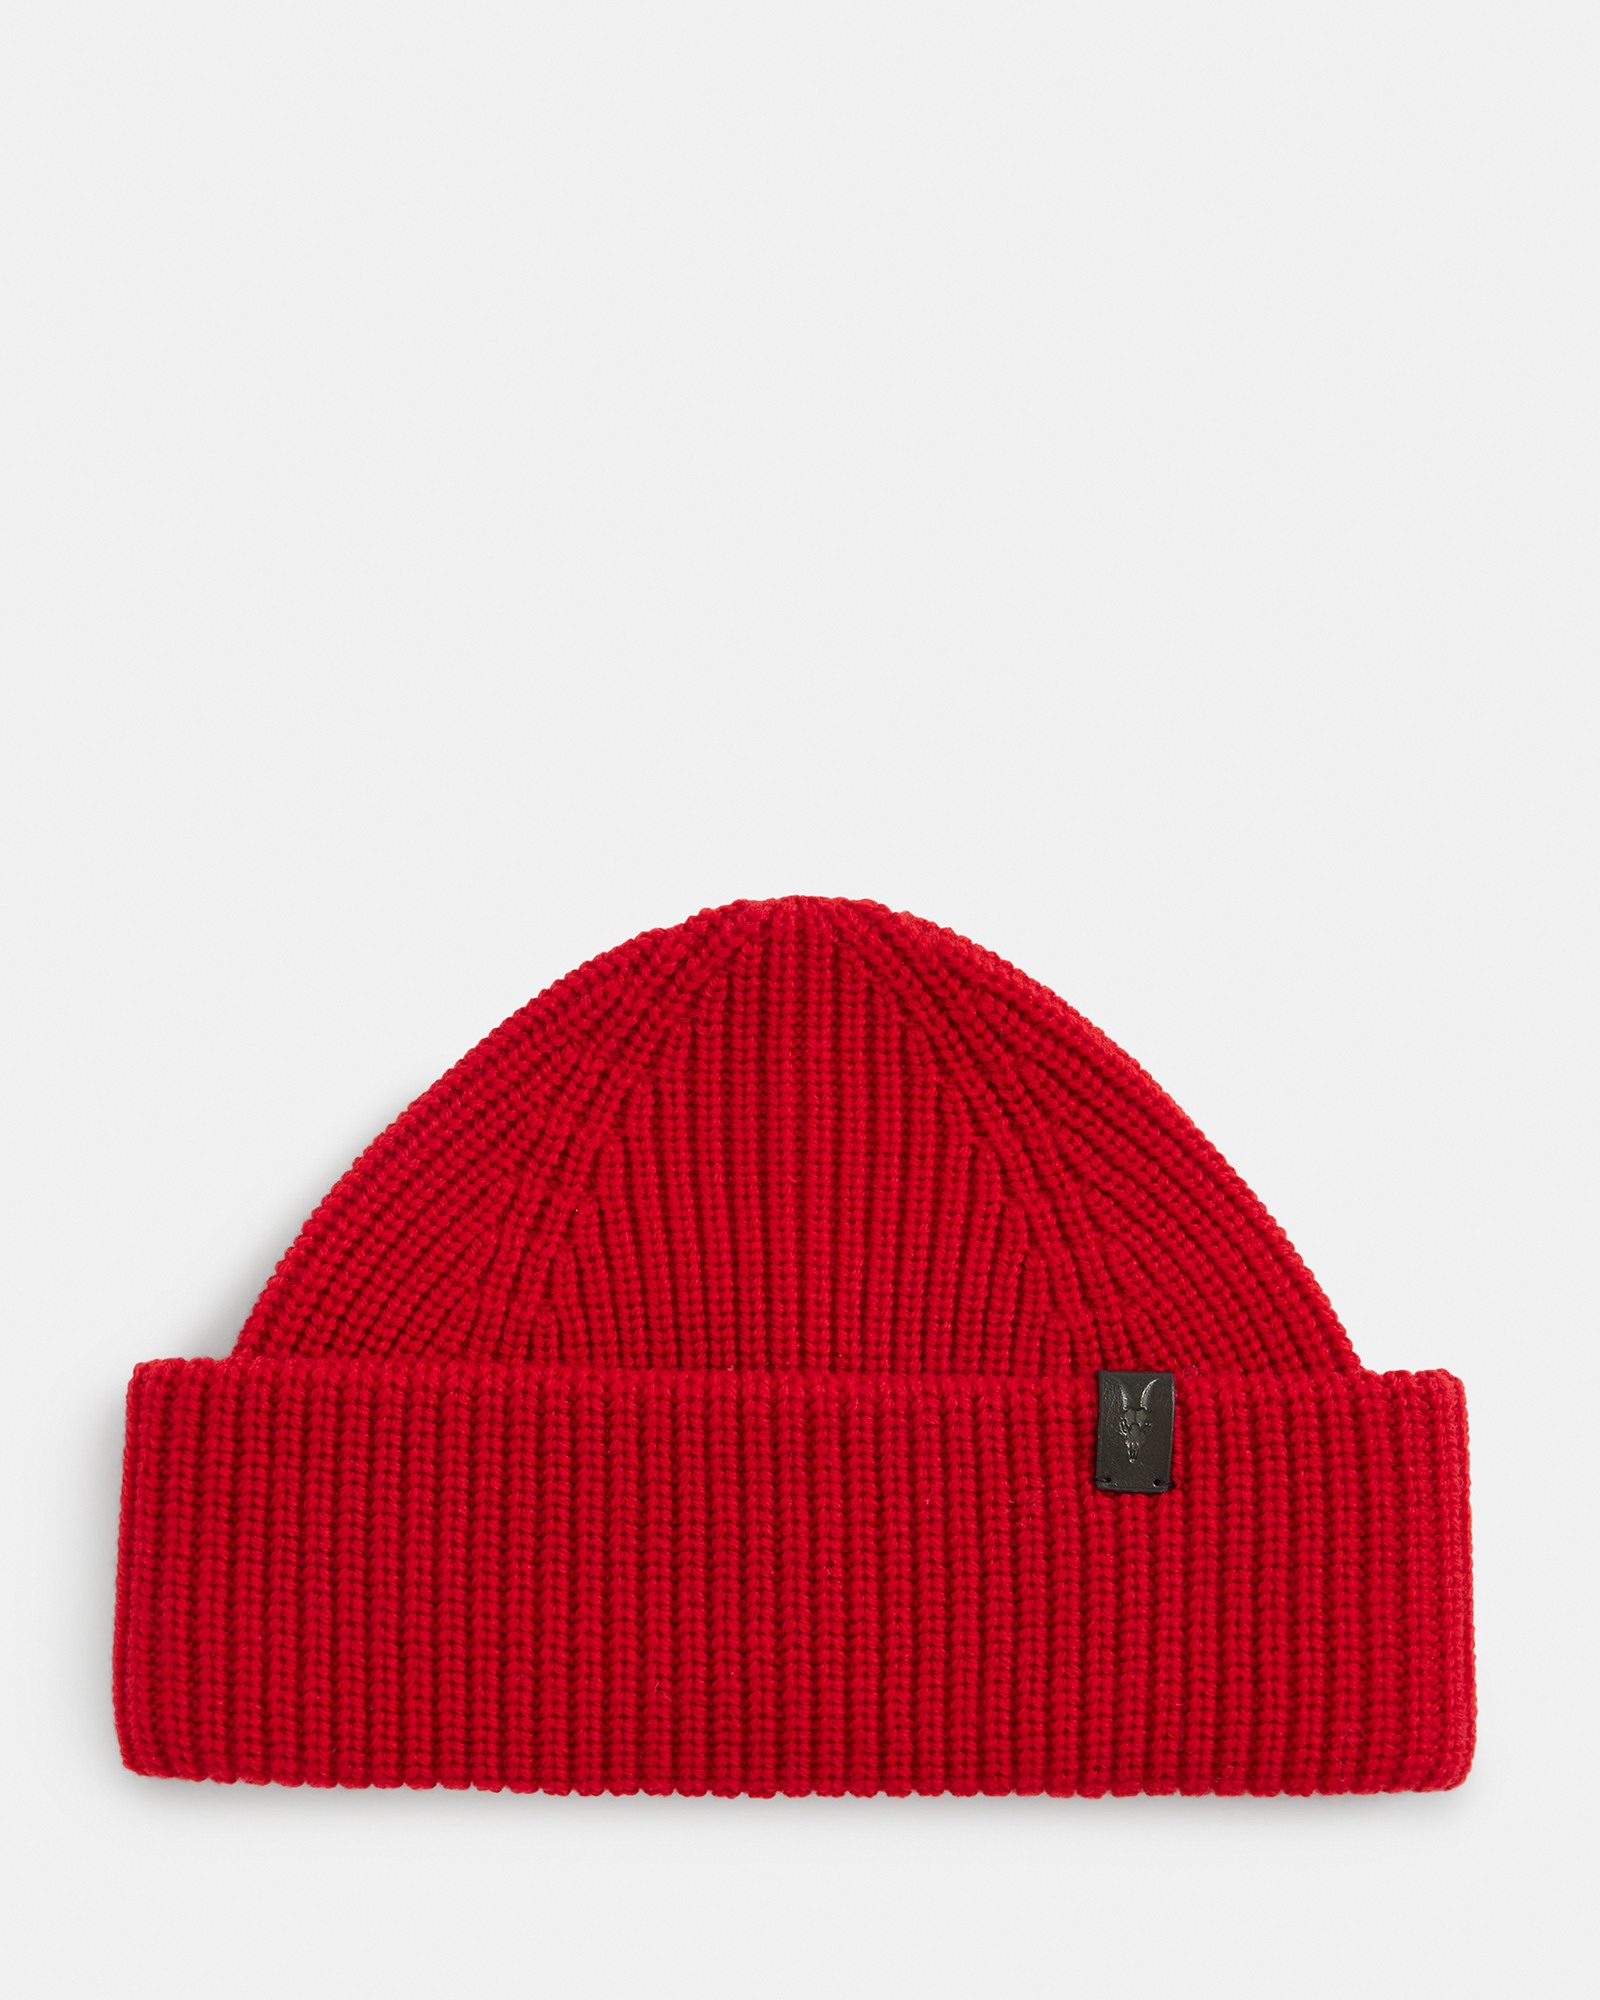 Merino Turned Up Wool US Cuff Beanie PYROPE | ALLSAINTS RED